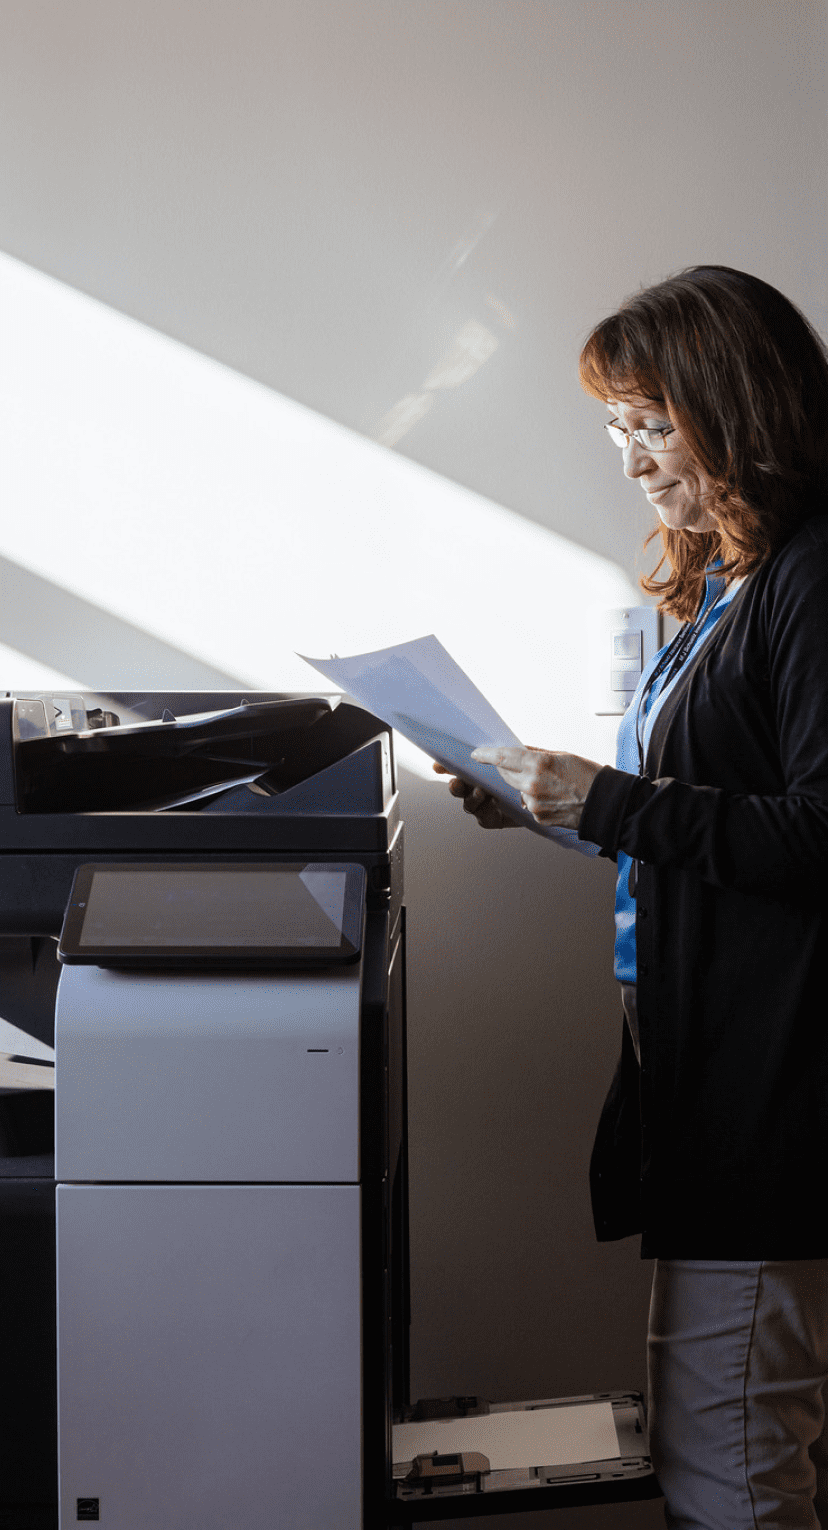 Person holding a piece of paper next to a large printer